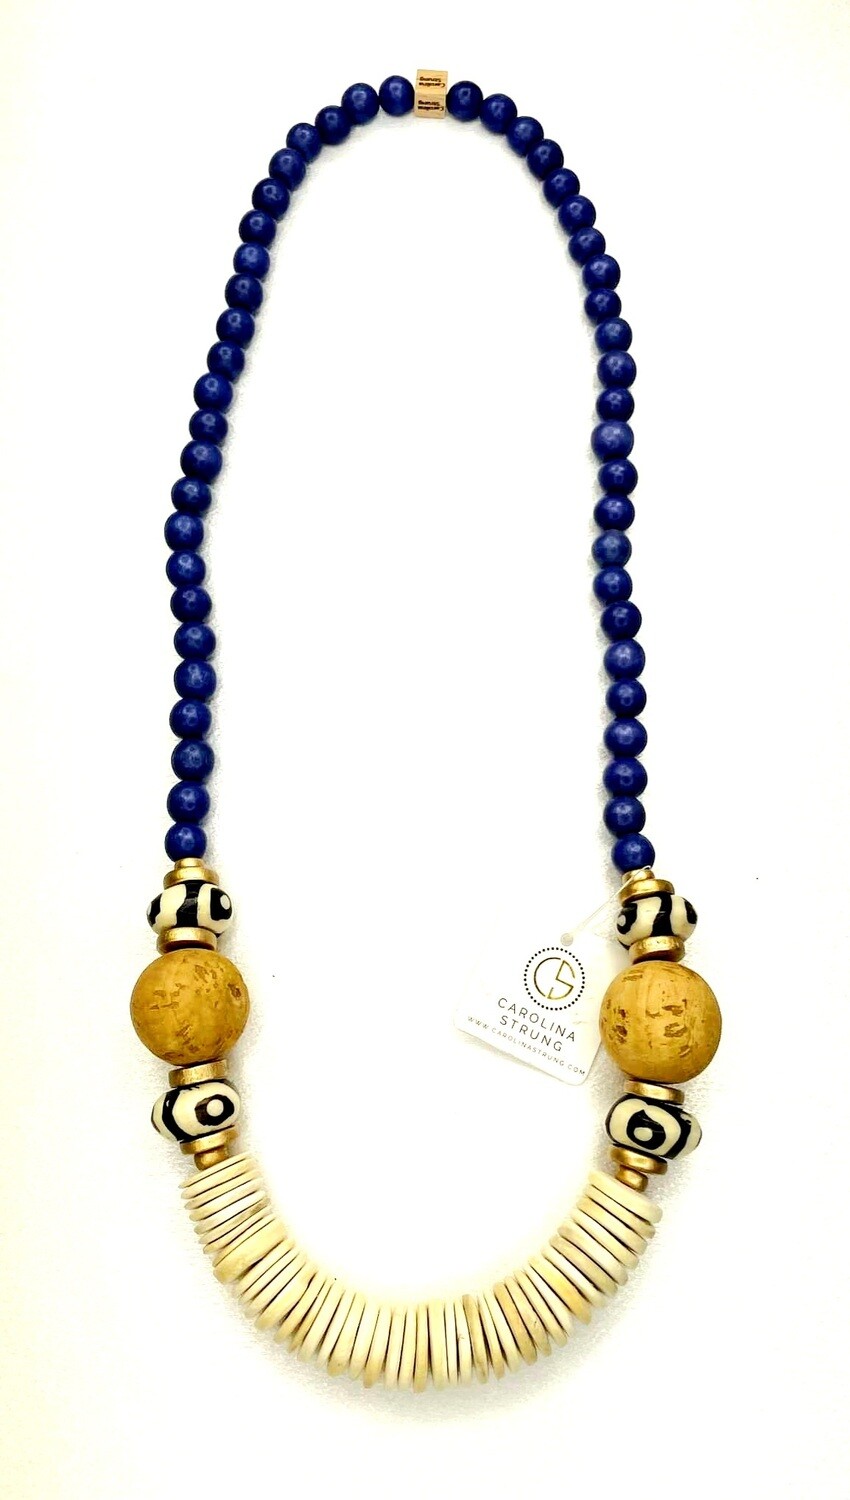 The Coco w/Blk/Ivy Beads & Cork Bead Necklace, 34"